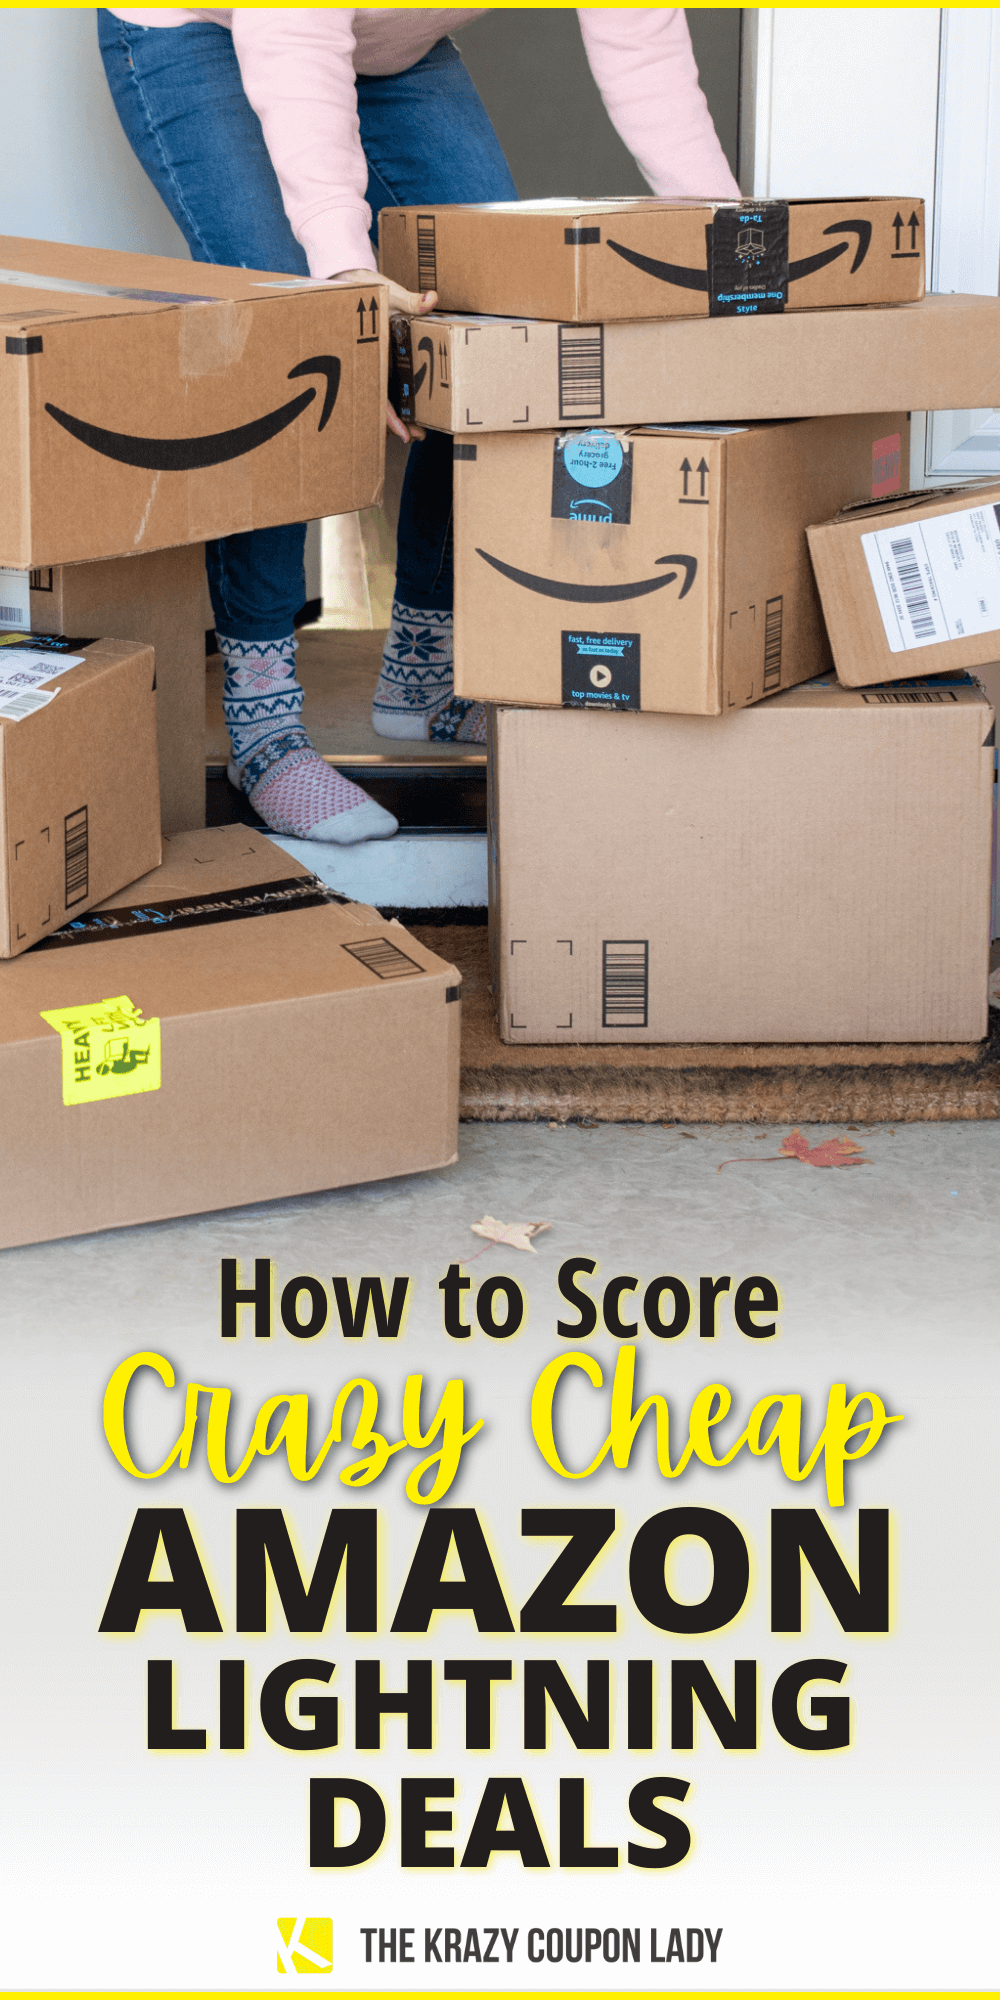 12 Tips To Scoring Amazon Lightning Deals - The Krazy Coupon Lady